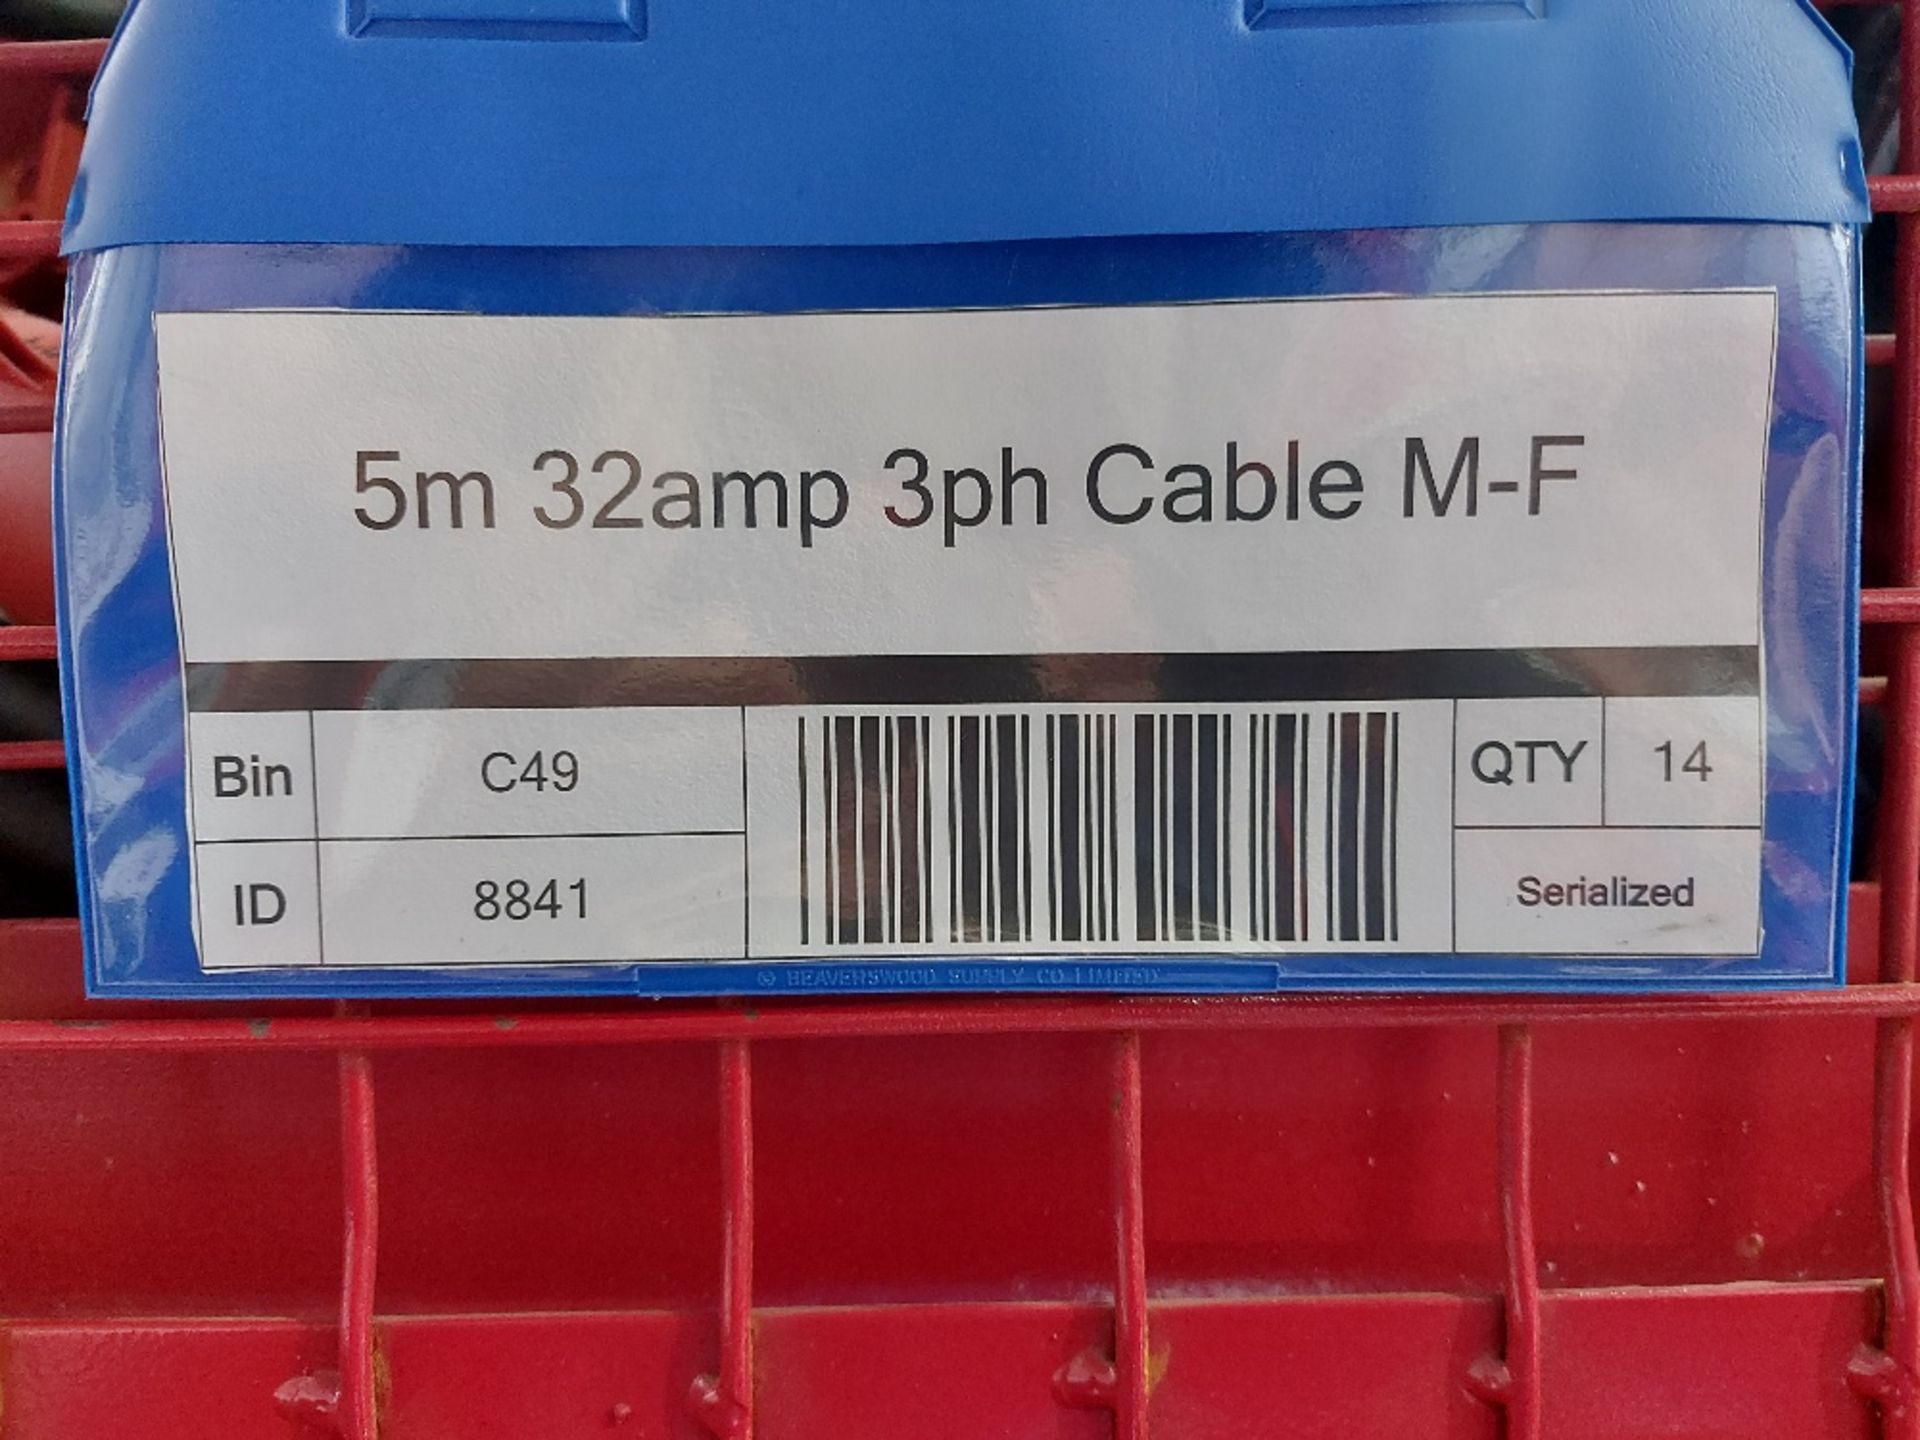 Large Quantity of 5m 32amp 3ph Cable M-F with Steel Fabricated Stillage - Image 3 of 3